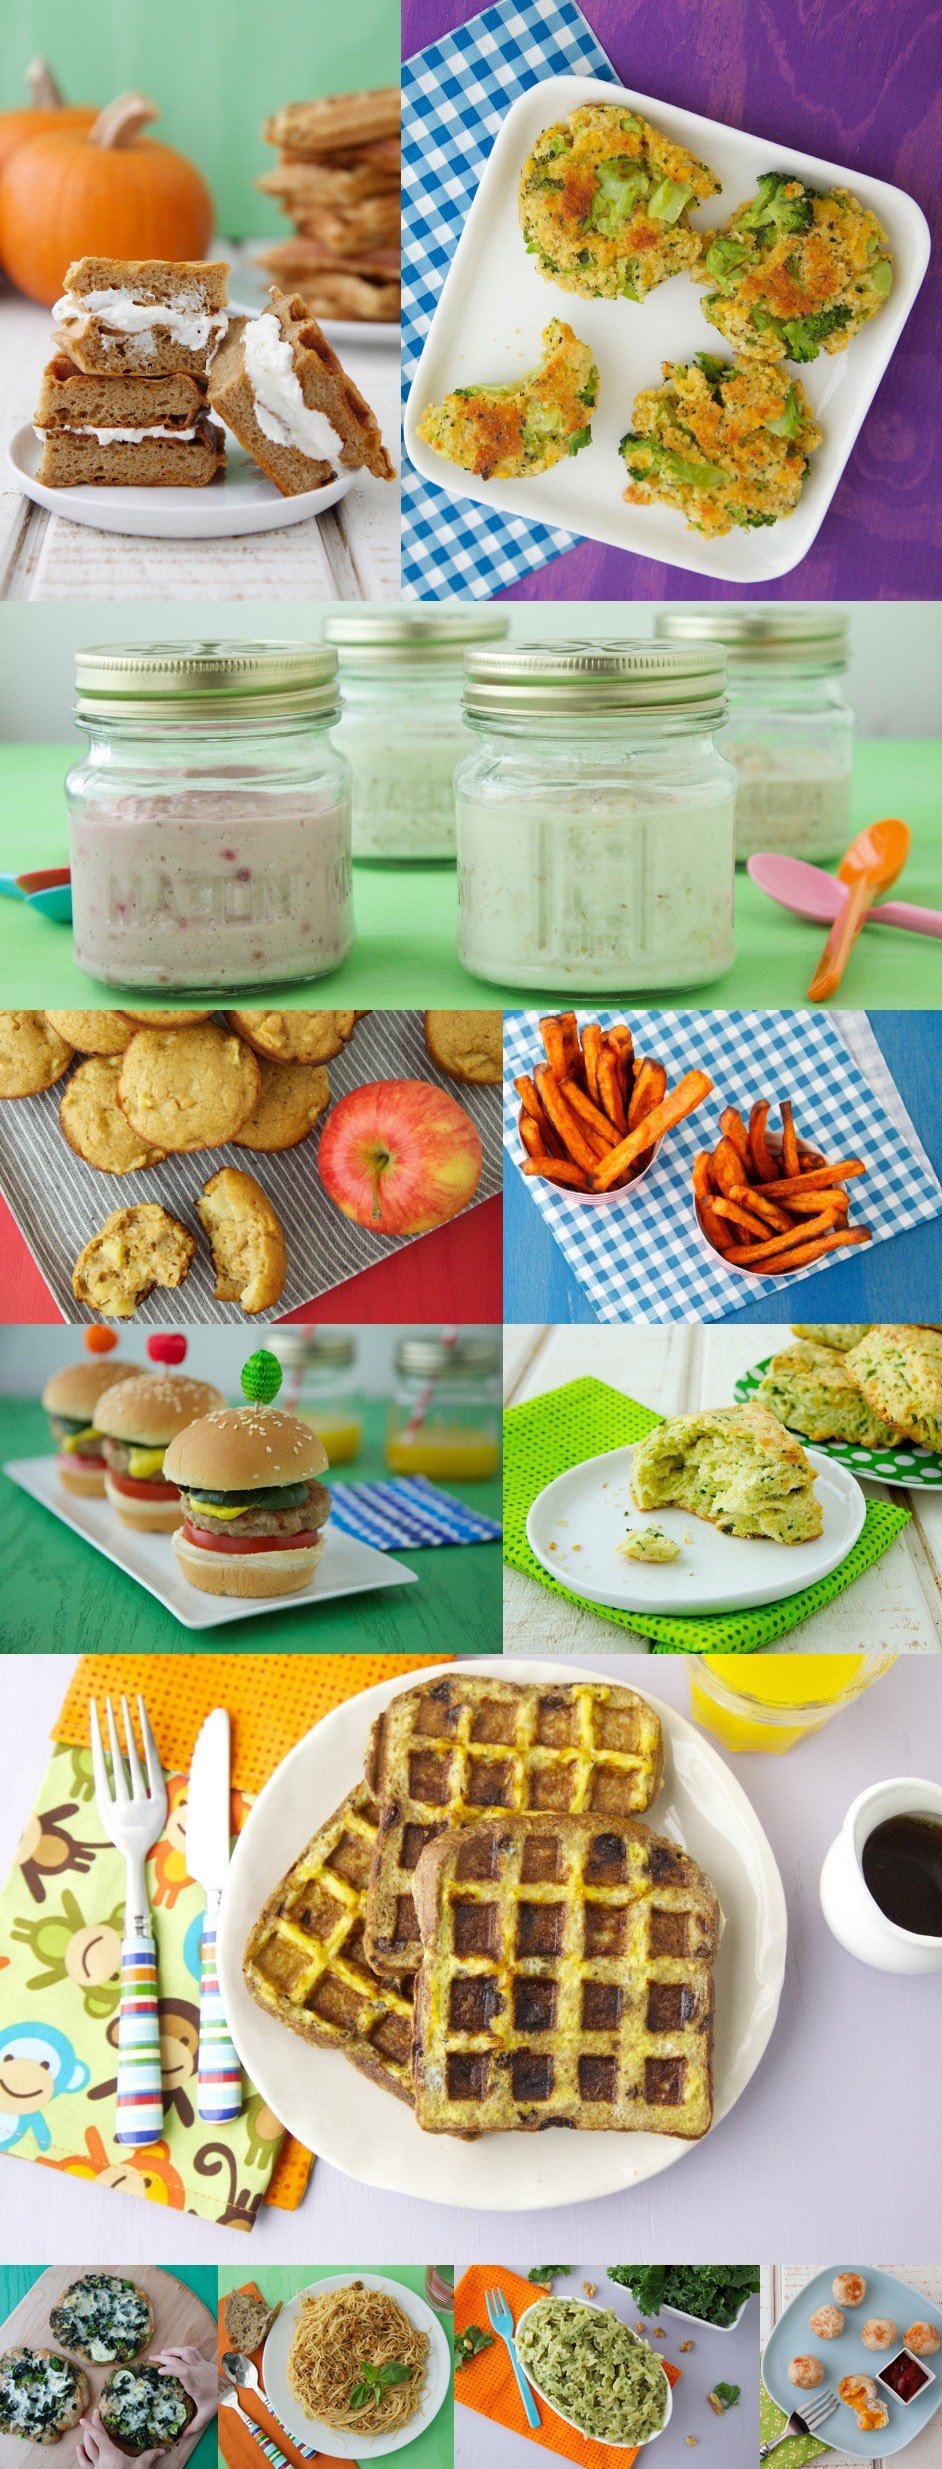 Top 12 Recipes of 2013 on Weelicious + a few Others!